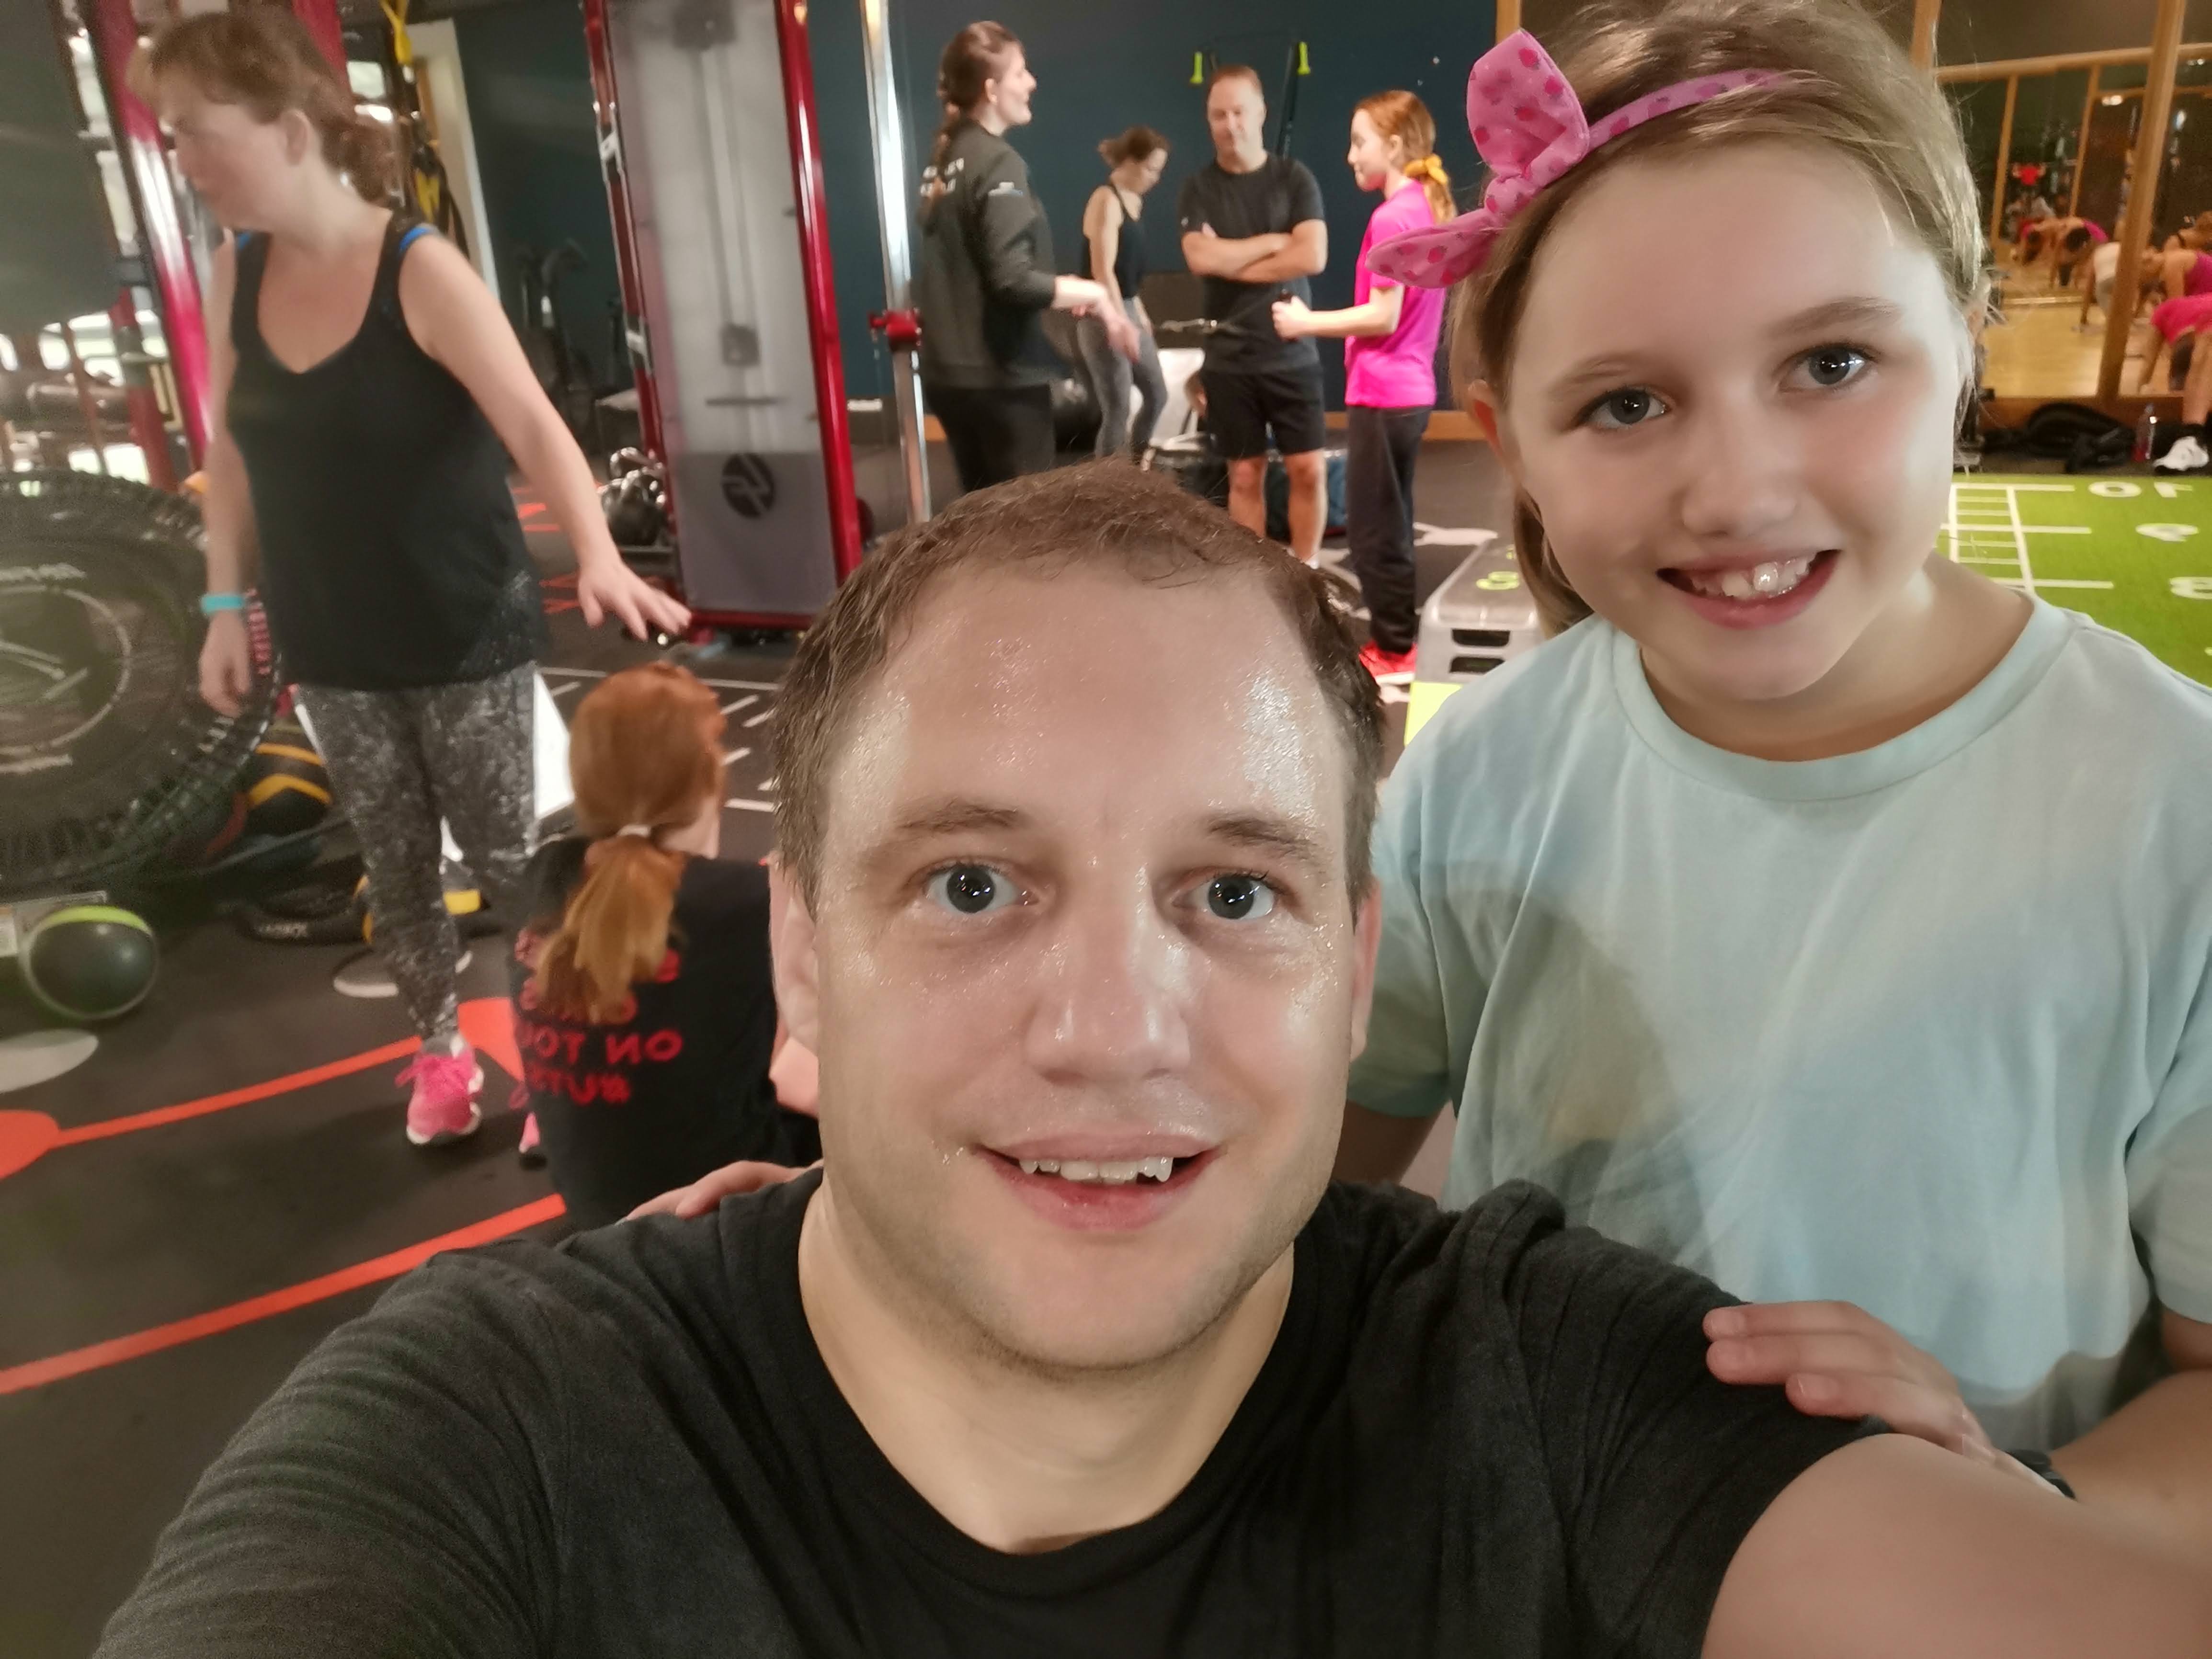 Myself and Hanna taking a smiling selfie in the gym, both looking at the camera, with other people exercising in the background